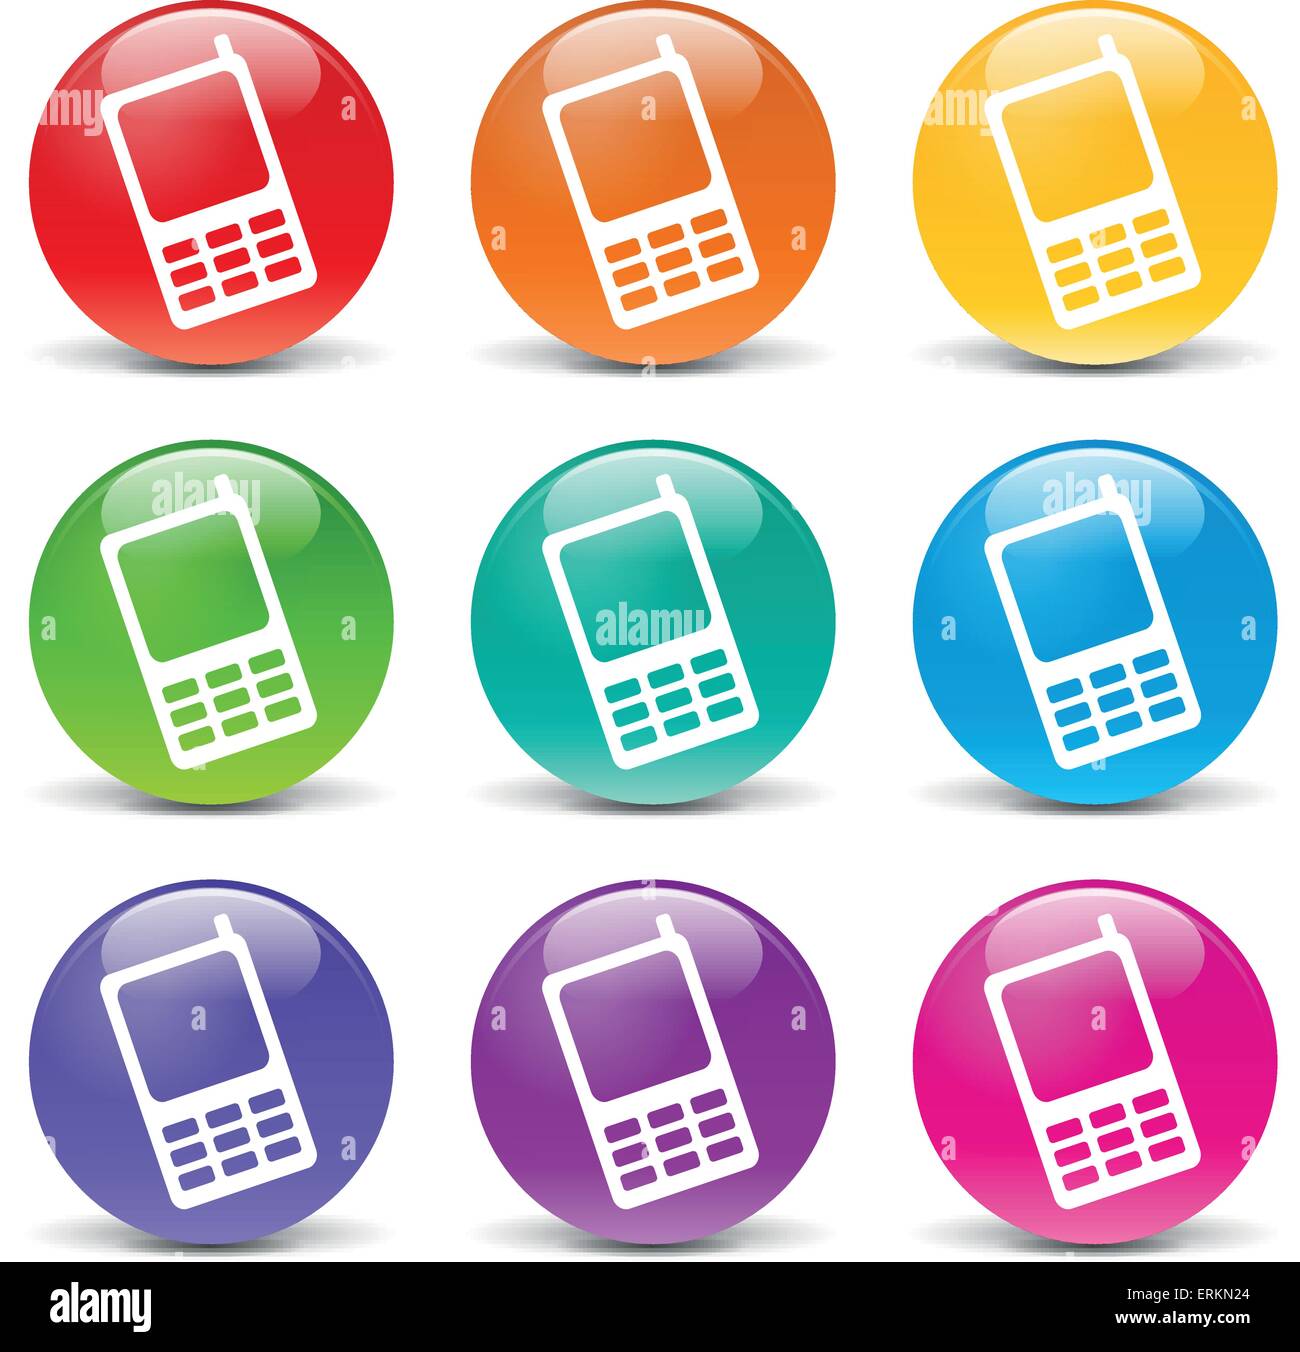 Vector illustration of cellphone set icons on white background Stock Vector